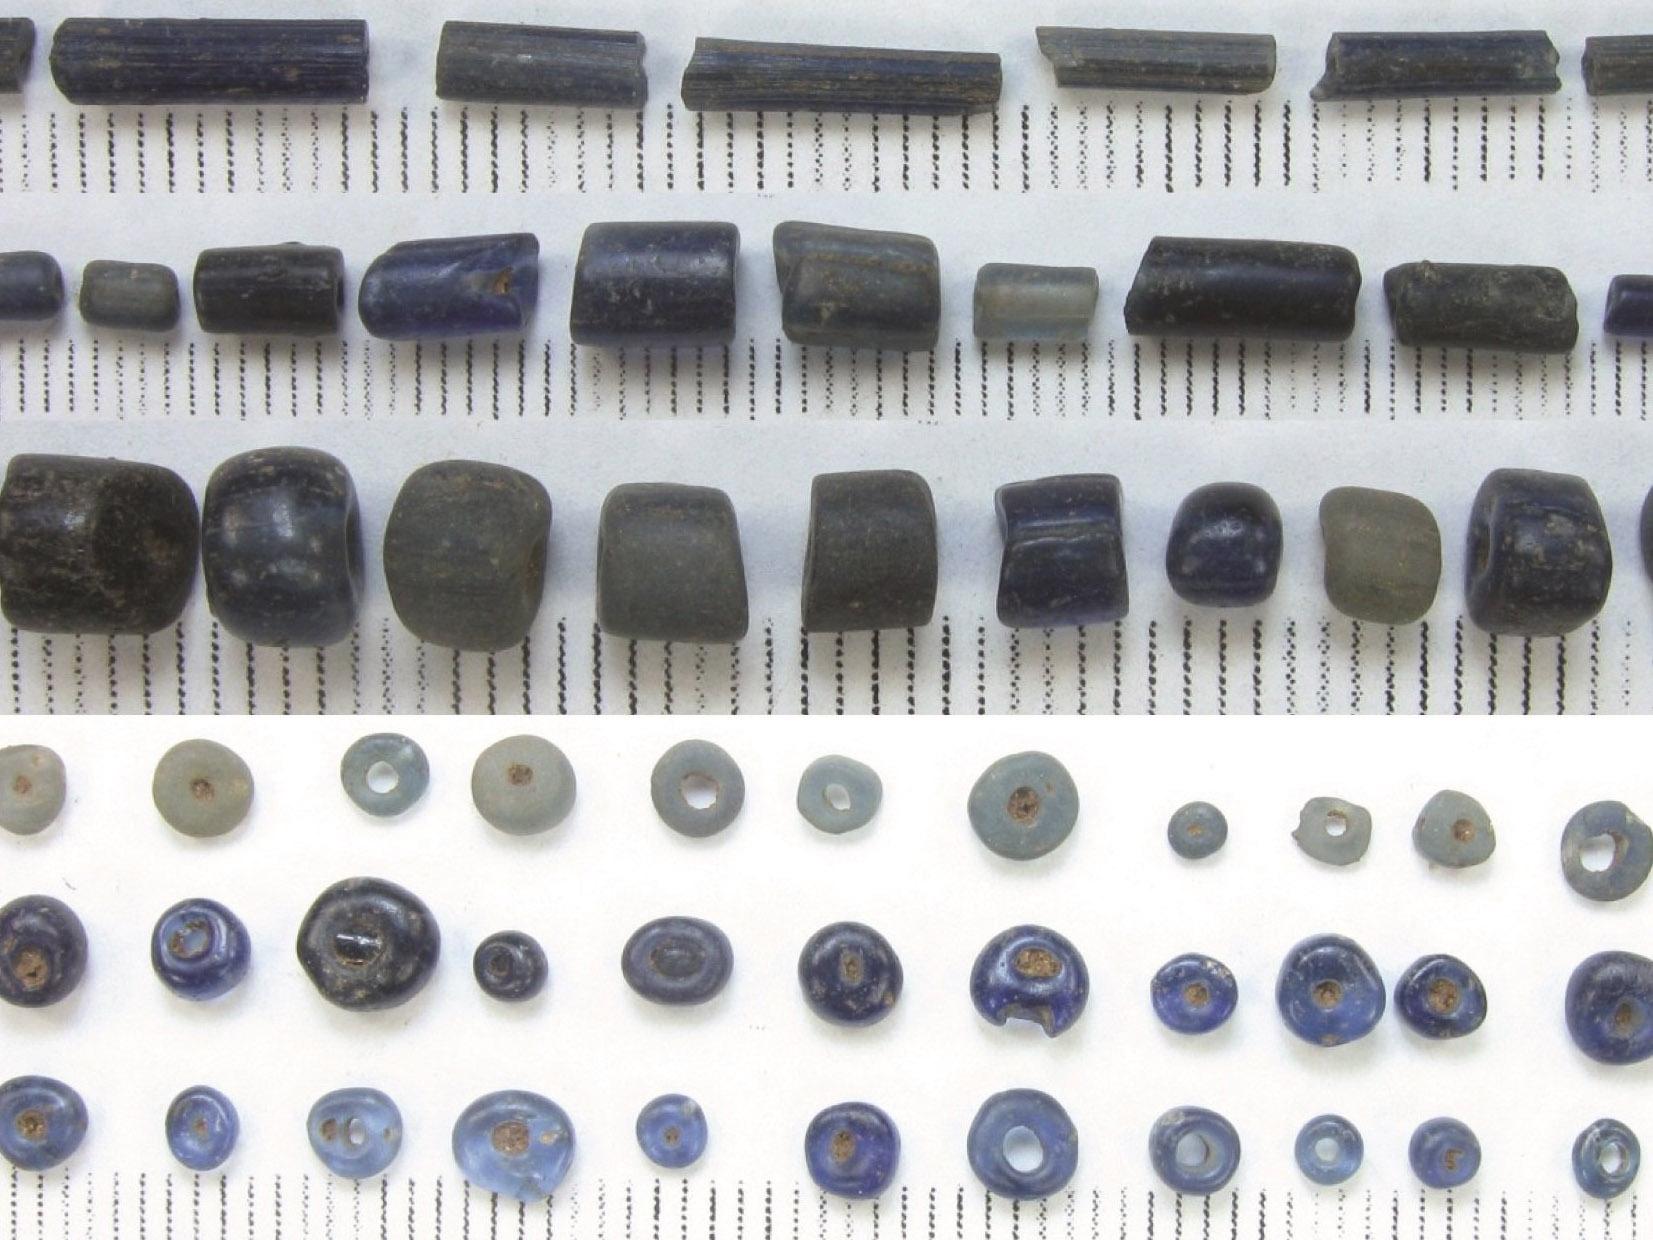 Analysis of glass found at a Nigerian site has revealed a unique sub-Saharan glass production industry that existed prior to the arrival of foreign traders